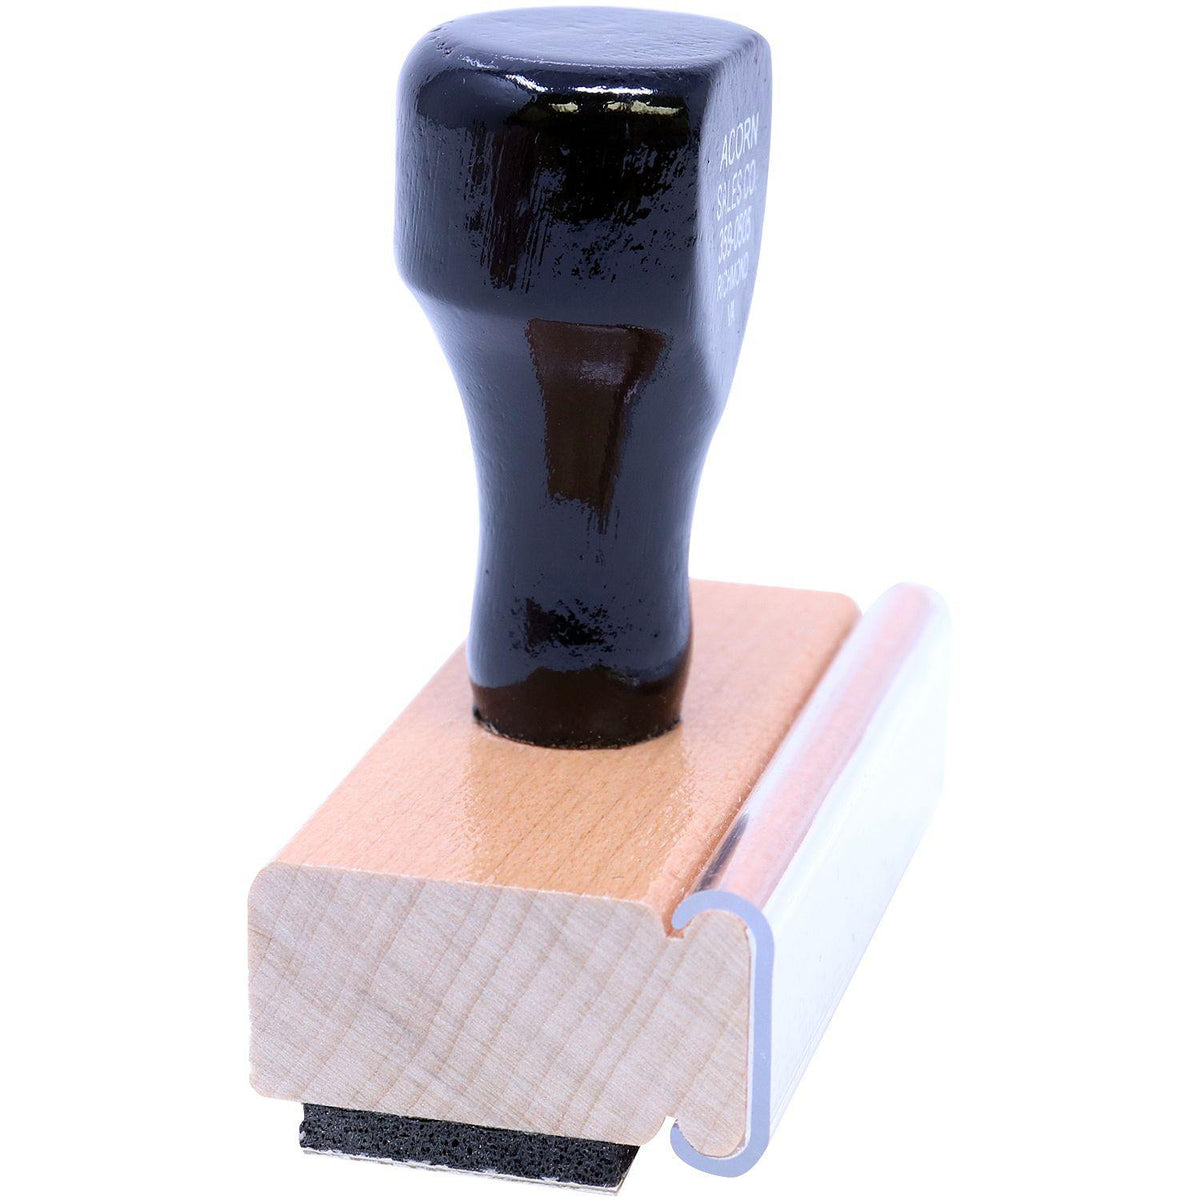 Lowercase Received with Date Box Rubber Stamp - Engineer Seal Stamps - Brand_Acorn, Impression Size_Small, Stamp Type_Regular Stamp, Type of Use_Postal, Type of Use_Shipping &amp; Receiving